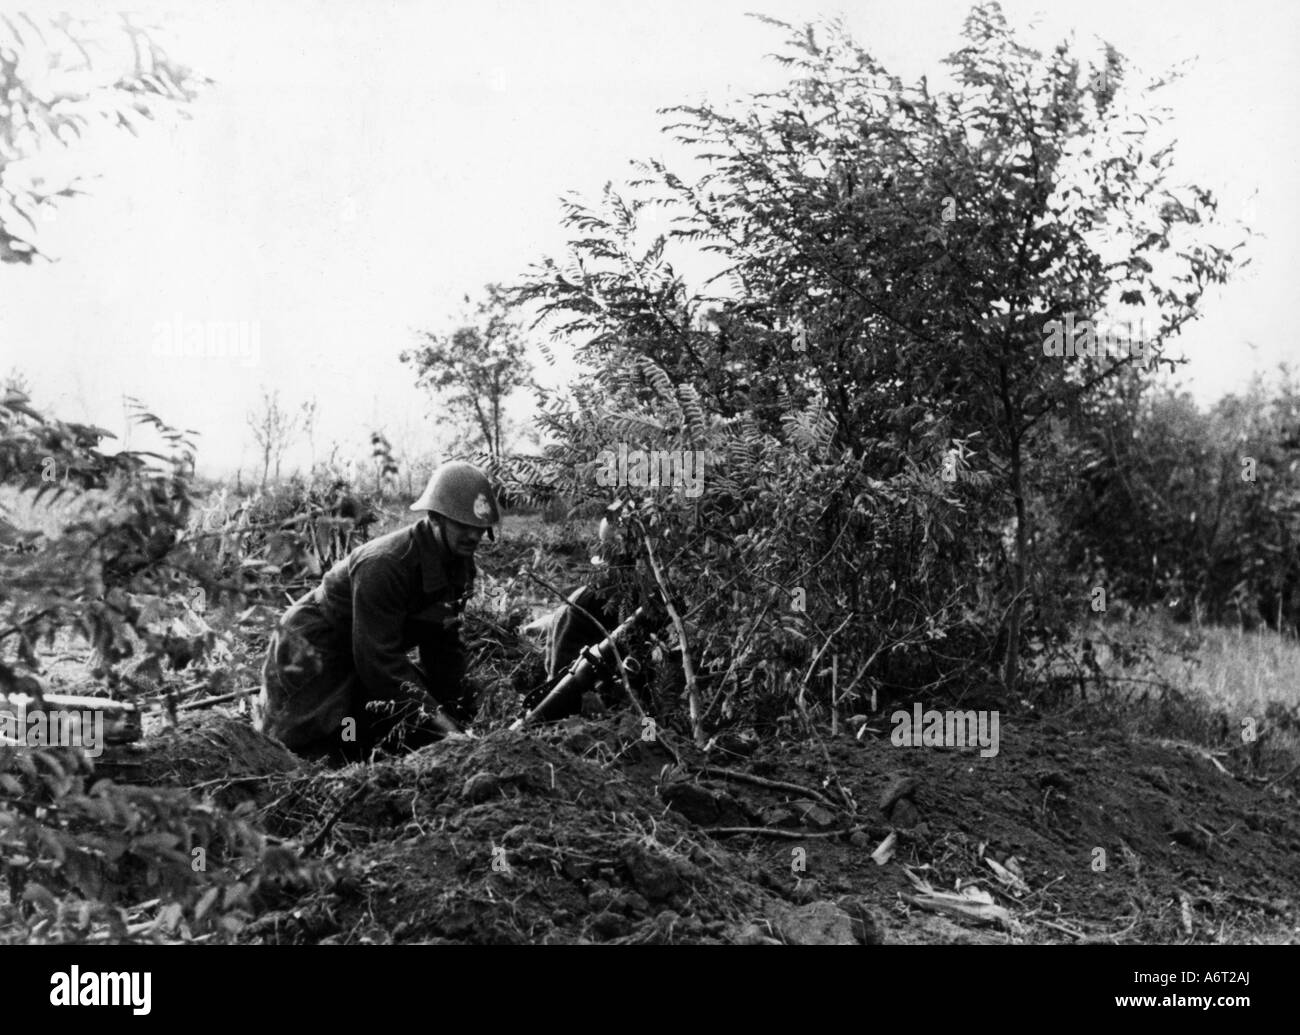 events, Second World War / WWII, Russia 1942 / 1943, Crimea, Ukraine, Romanian position near Novo Alexandrovko, 21.10.1943, mortar, USSR, military, Axis forces, Romania, Rumania, Rumanian, infantry, soldiers, 20th century, historic, historical, Eastern Front, people, 1940s, Stock Photo